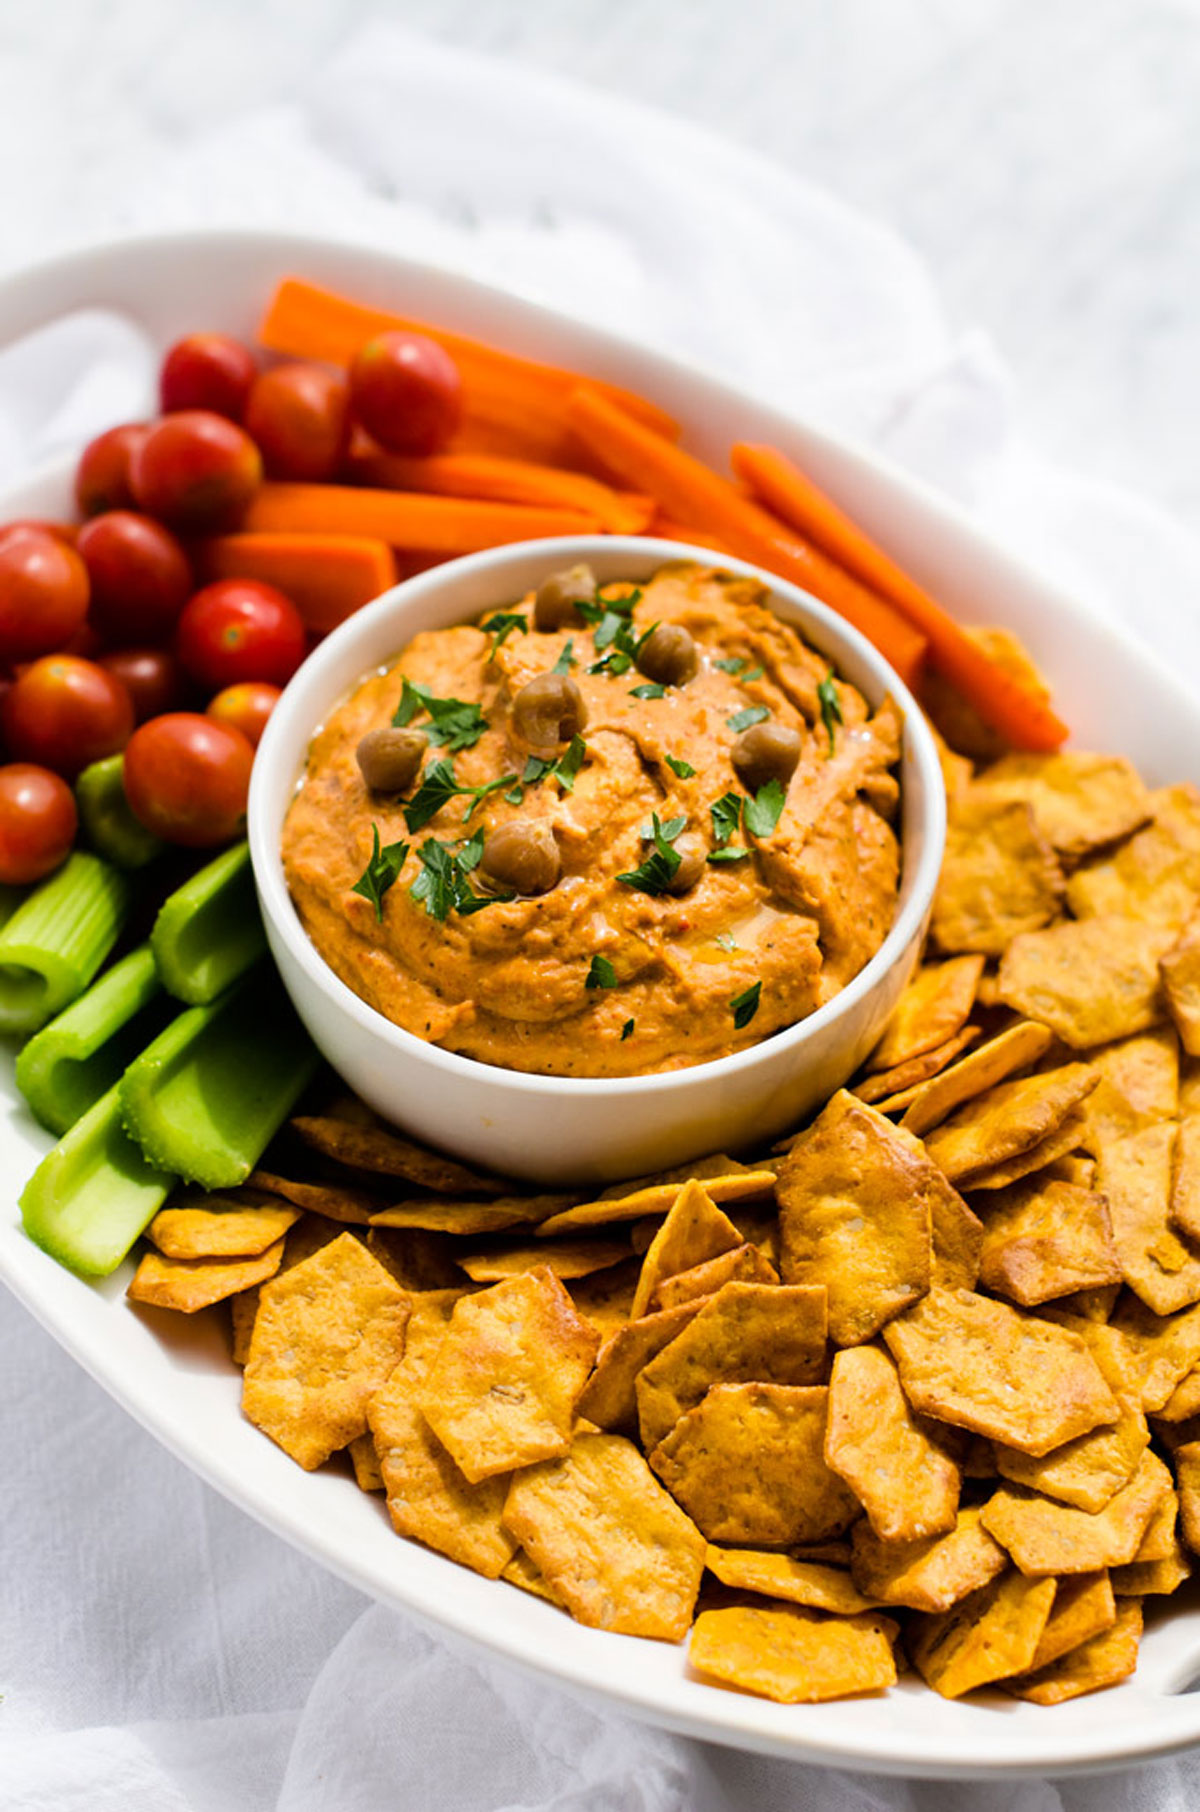 Photo of a platter with red pepper hummus surrounded by crackers and fresh vegetables.